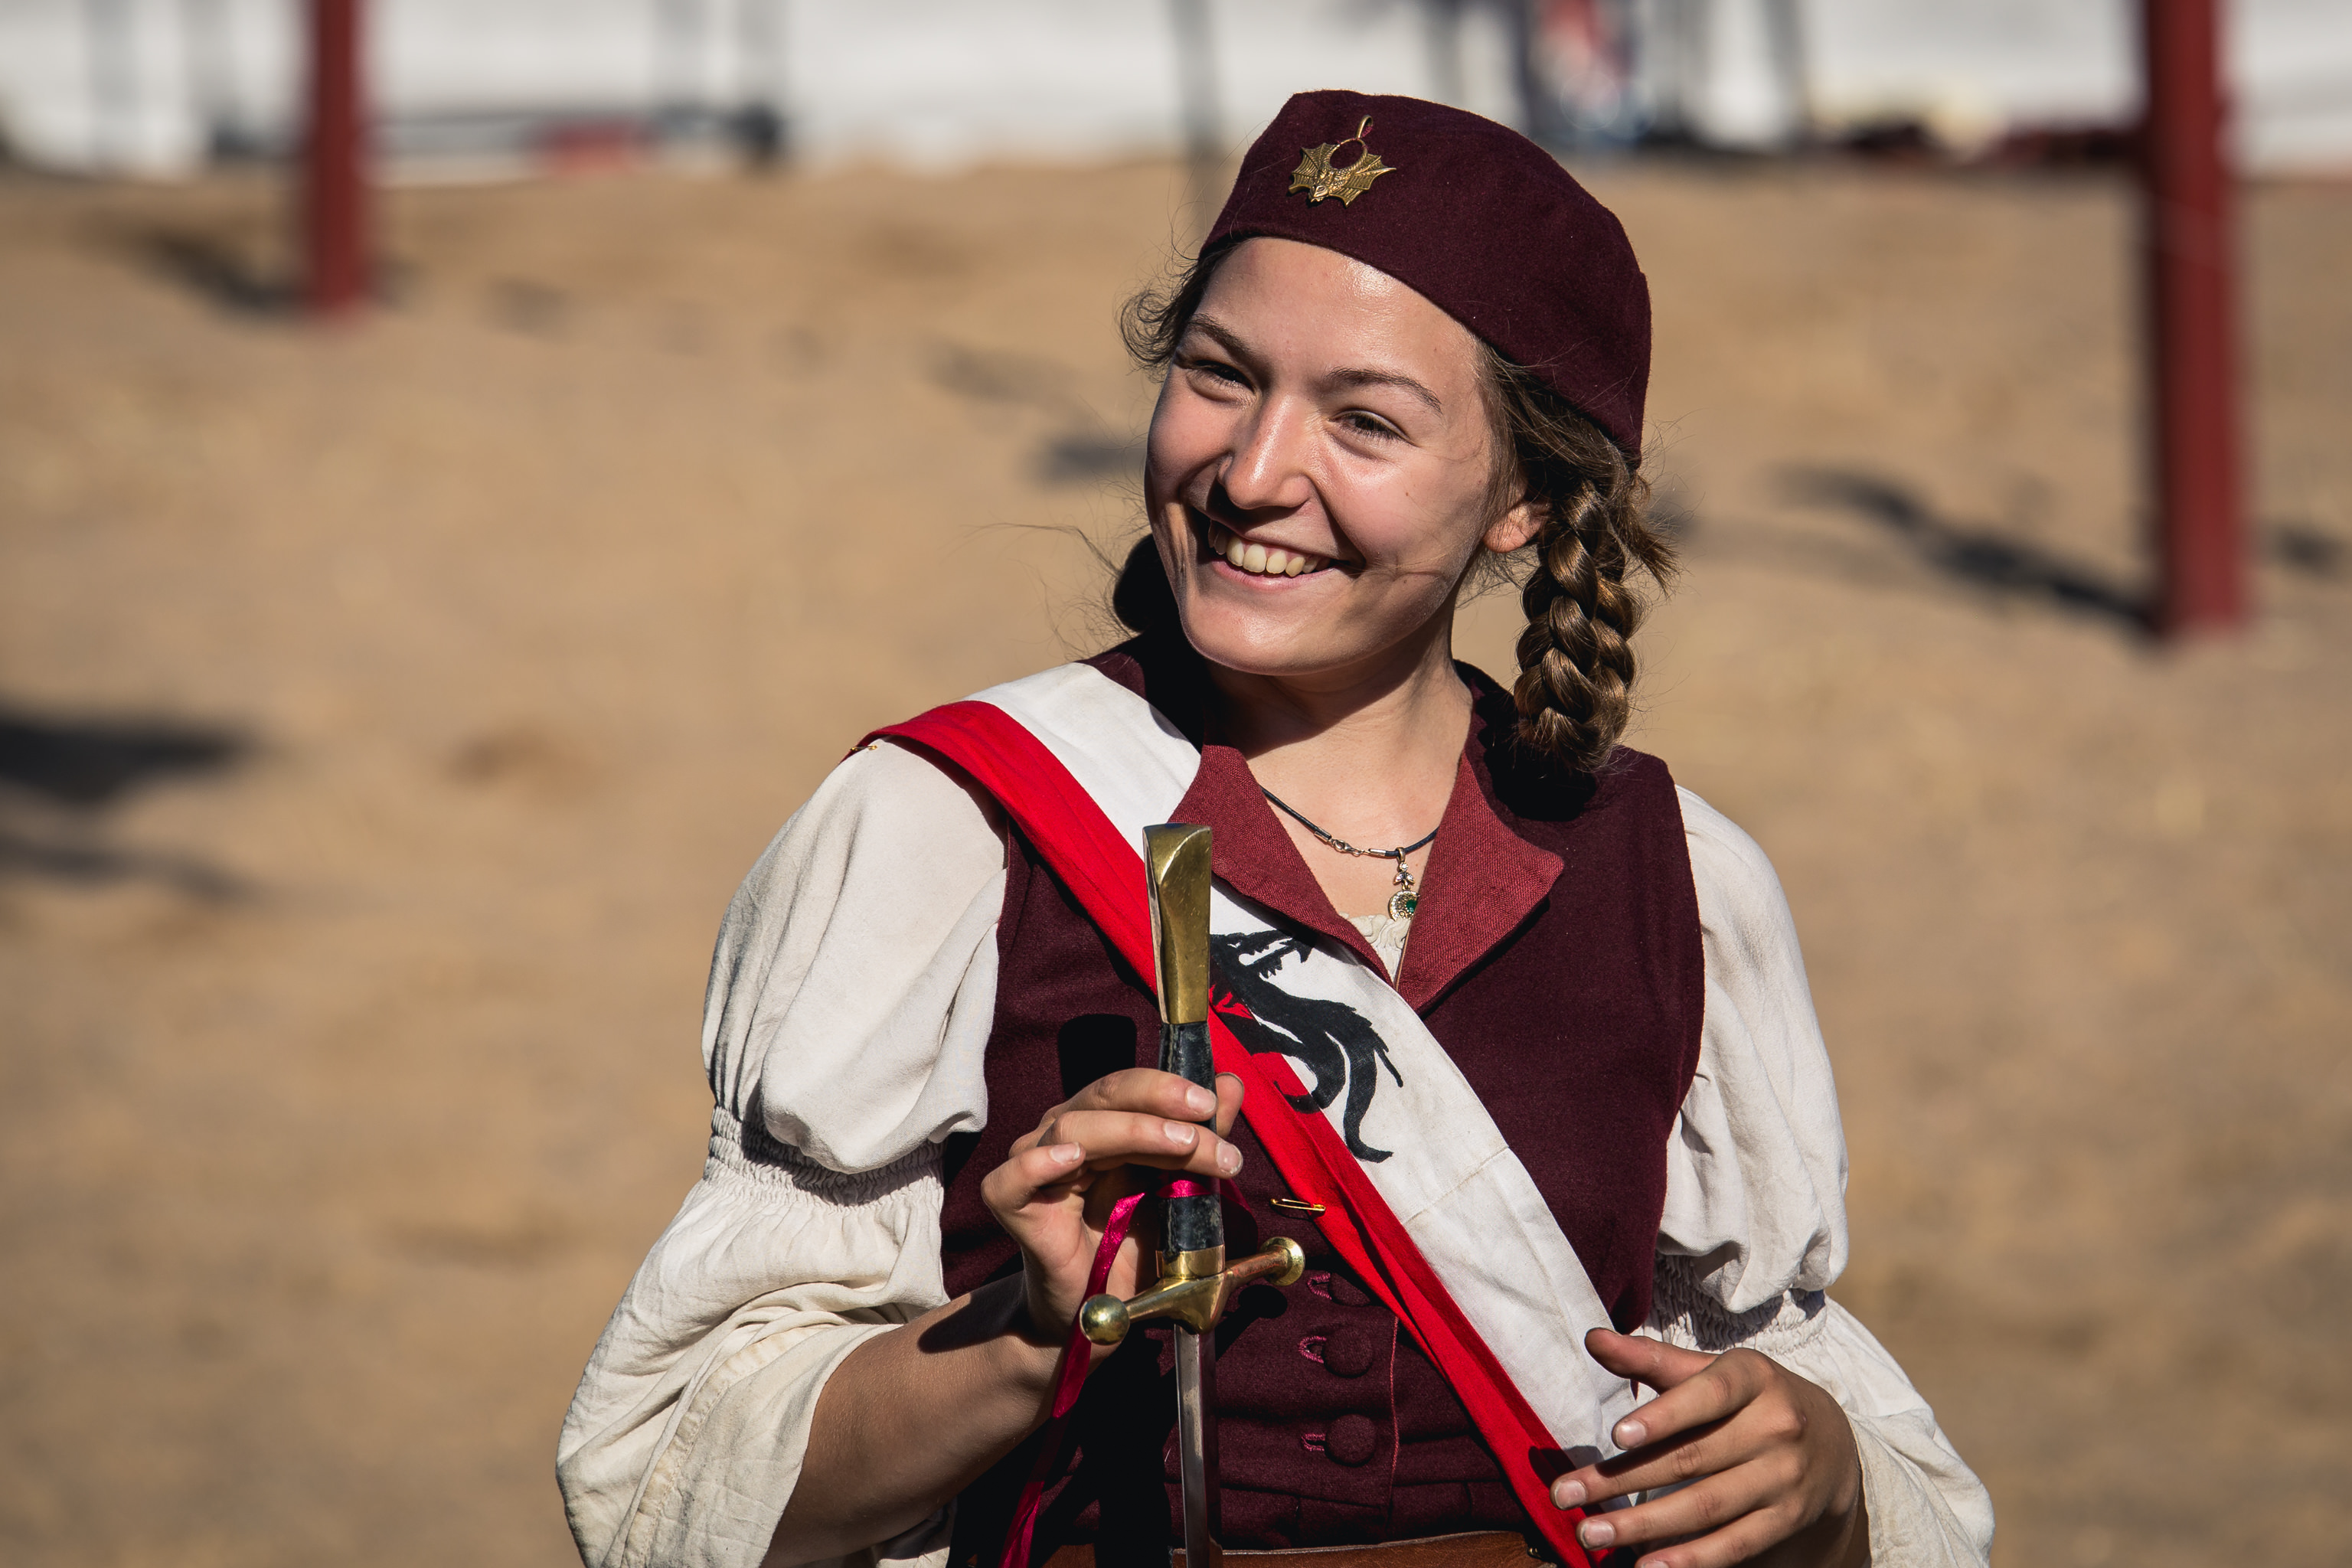 Medieval Photography: Putting Your Skills to Work on Medieval Tournament